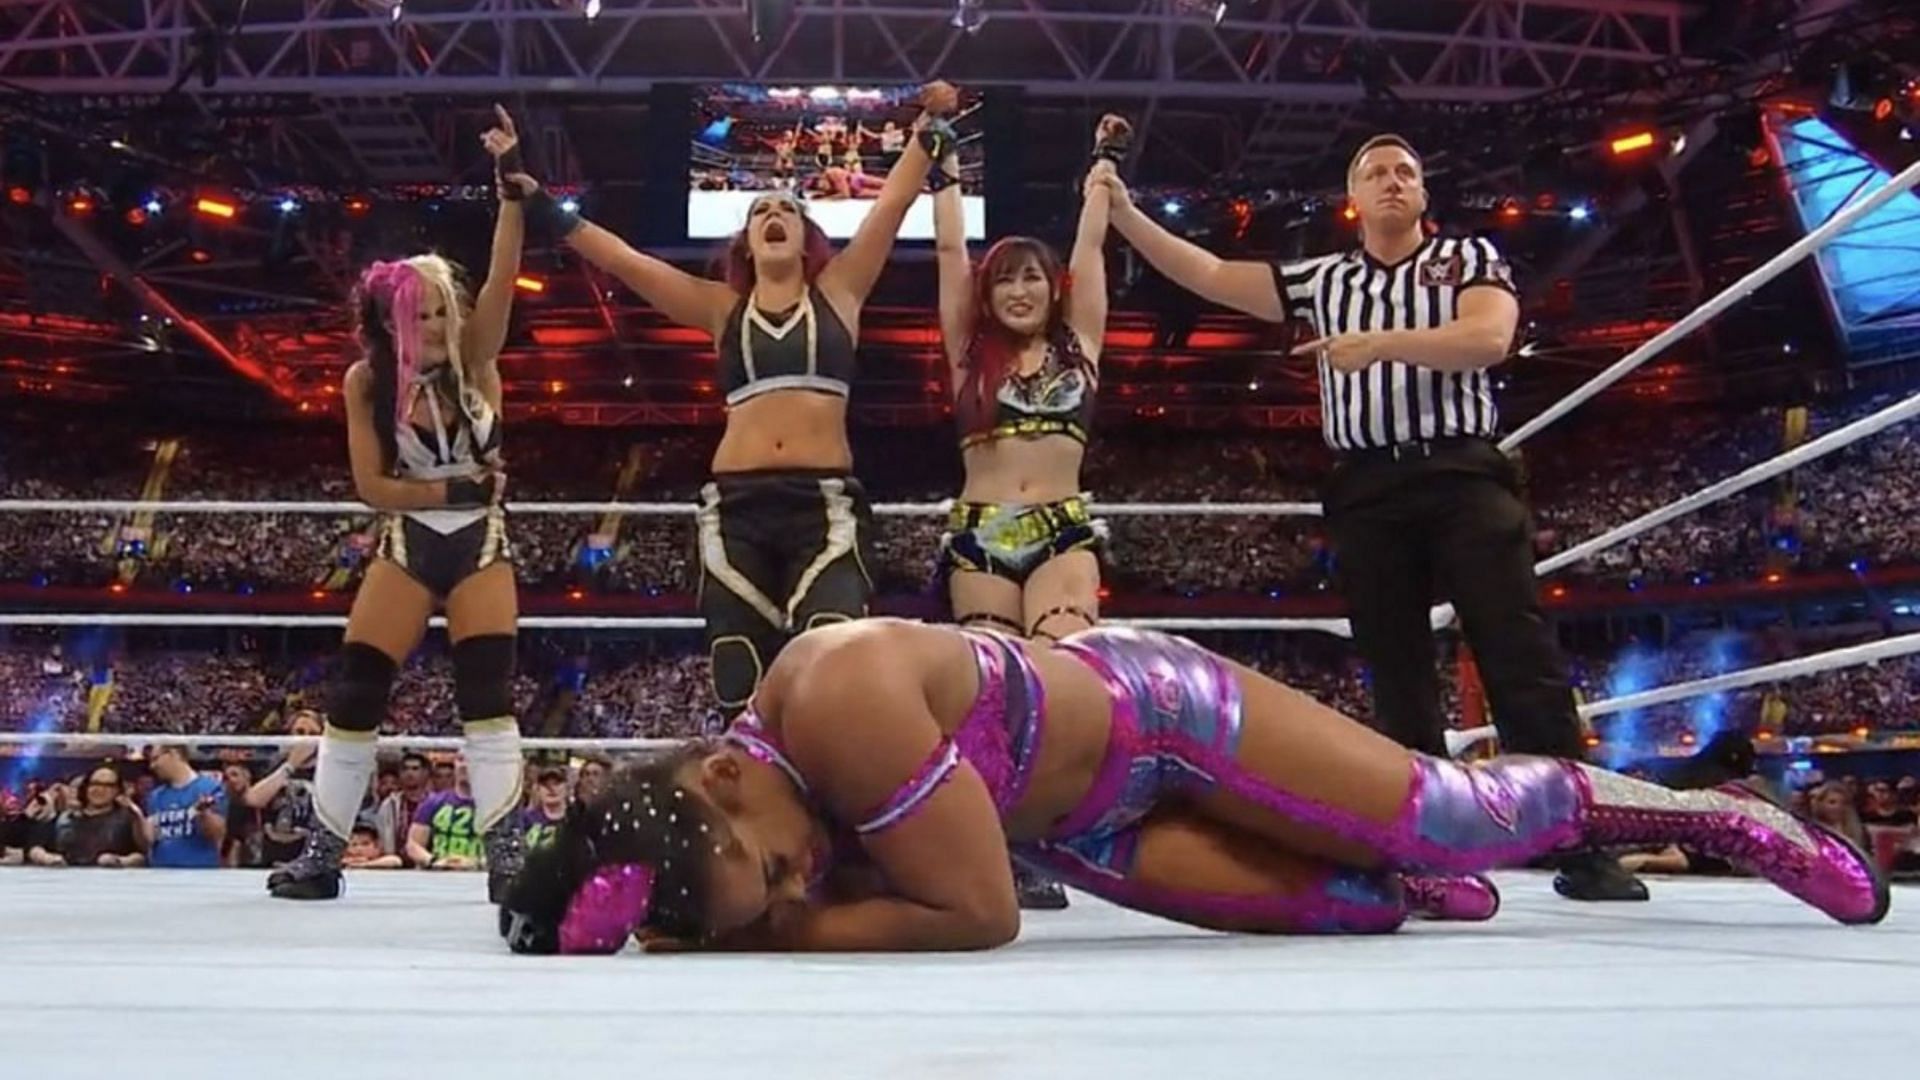 Bayley pinned Bianca Belair to earn the victory for her team